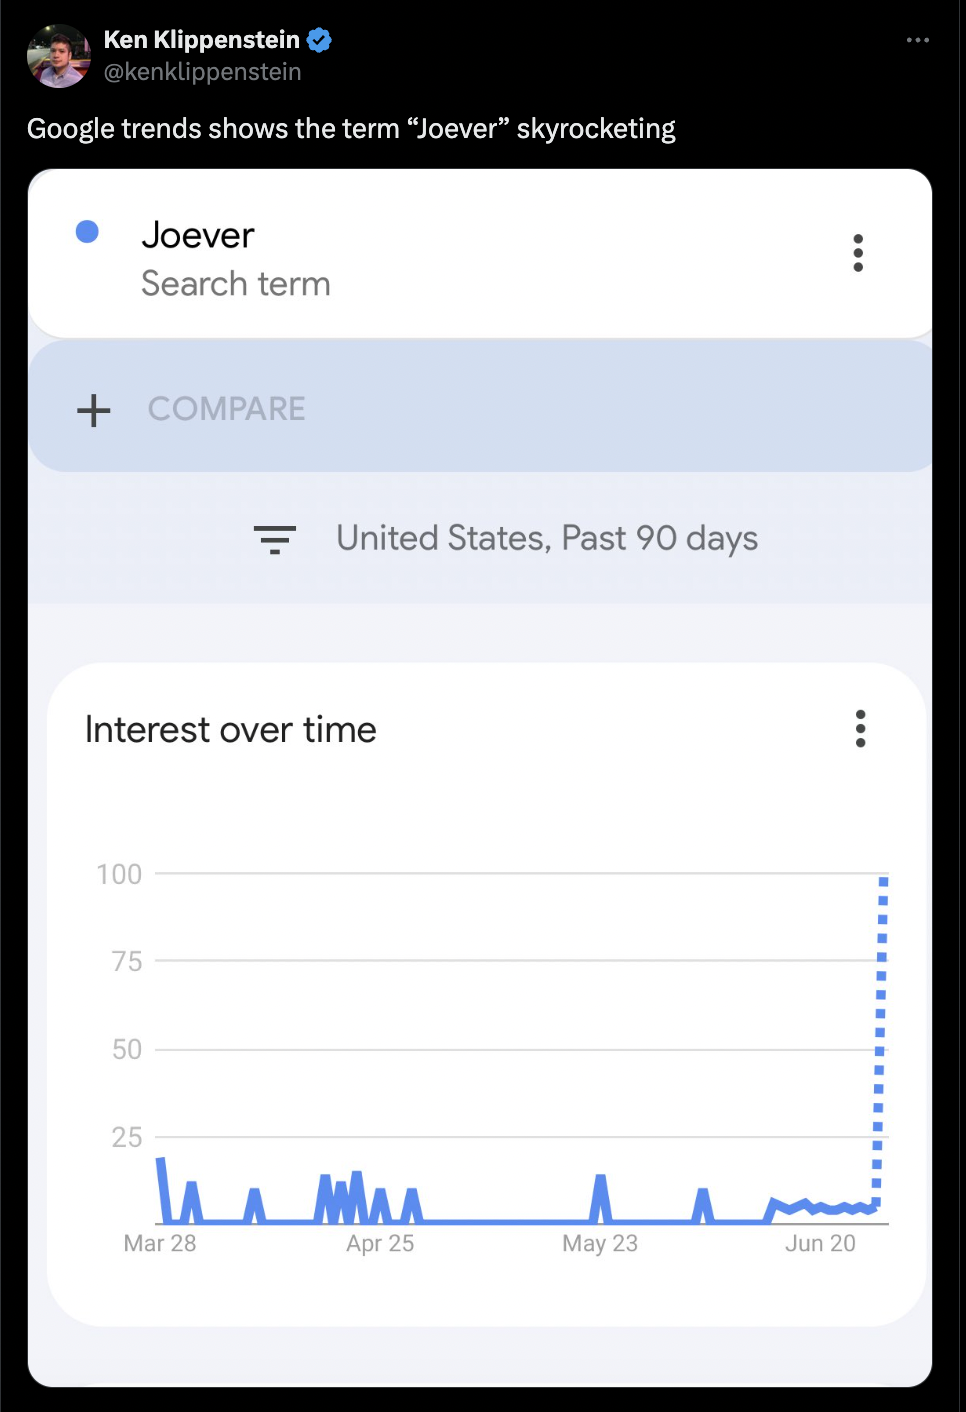 screenshot - Ken Klippenstein Google trends shows the term "Joever" skyrocketing Joever Search term Compare United States, Past 90 days Interest over time 100 75 50 25 La Man Mar 28 Apr 25 May 23 Jun 20